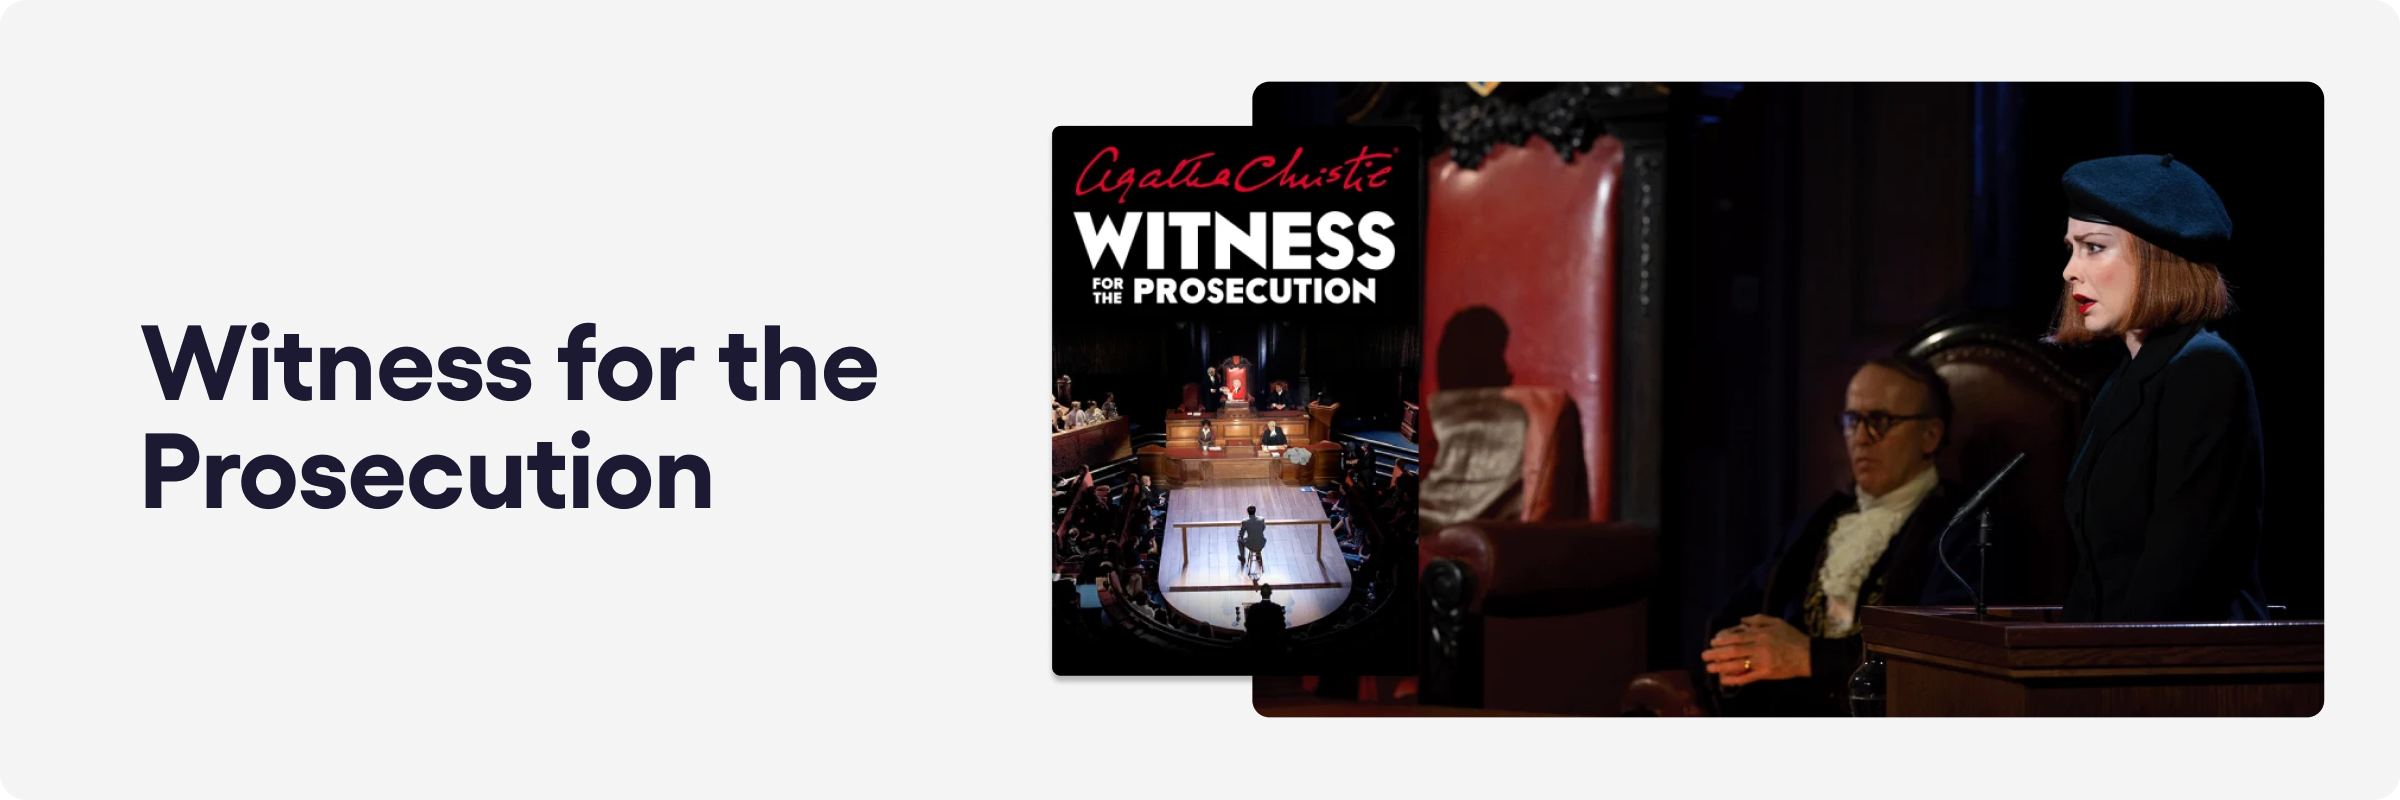 Recommended shows - Witness for the Prosecution